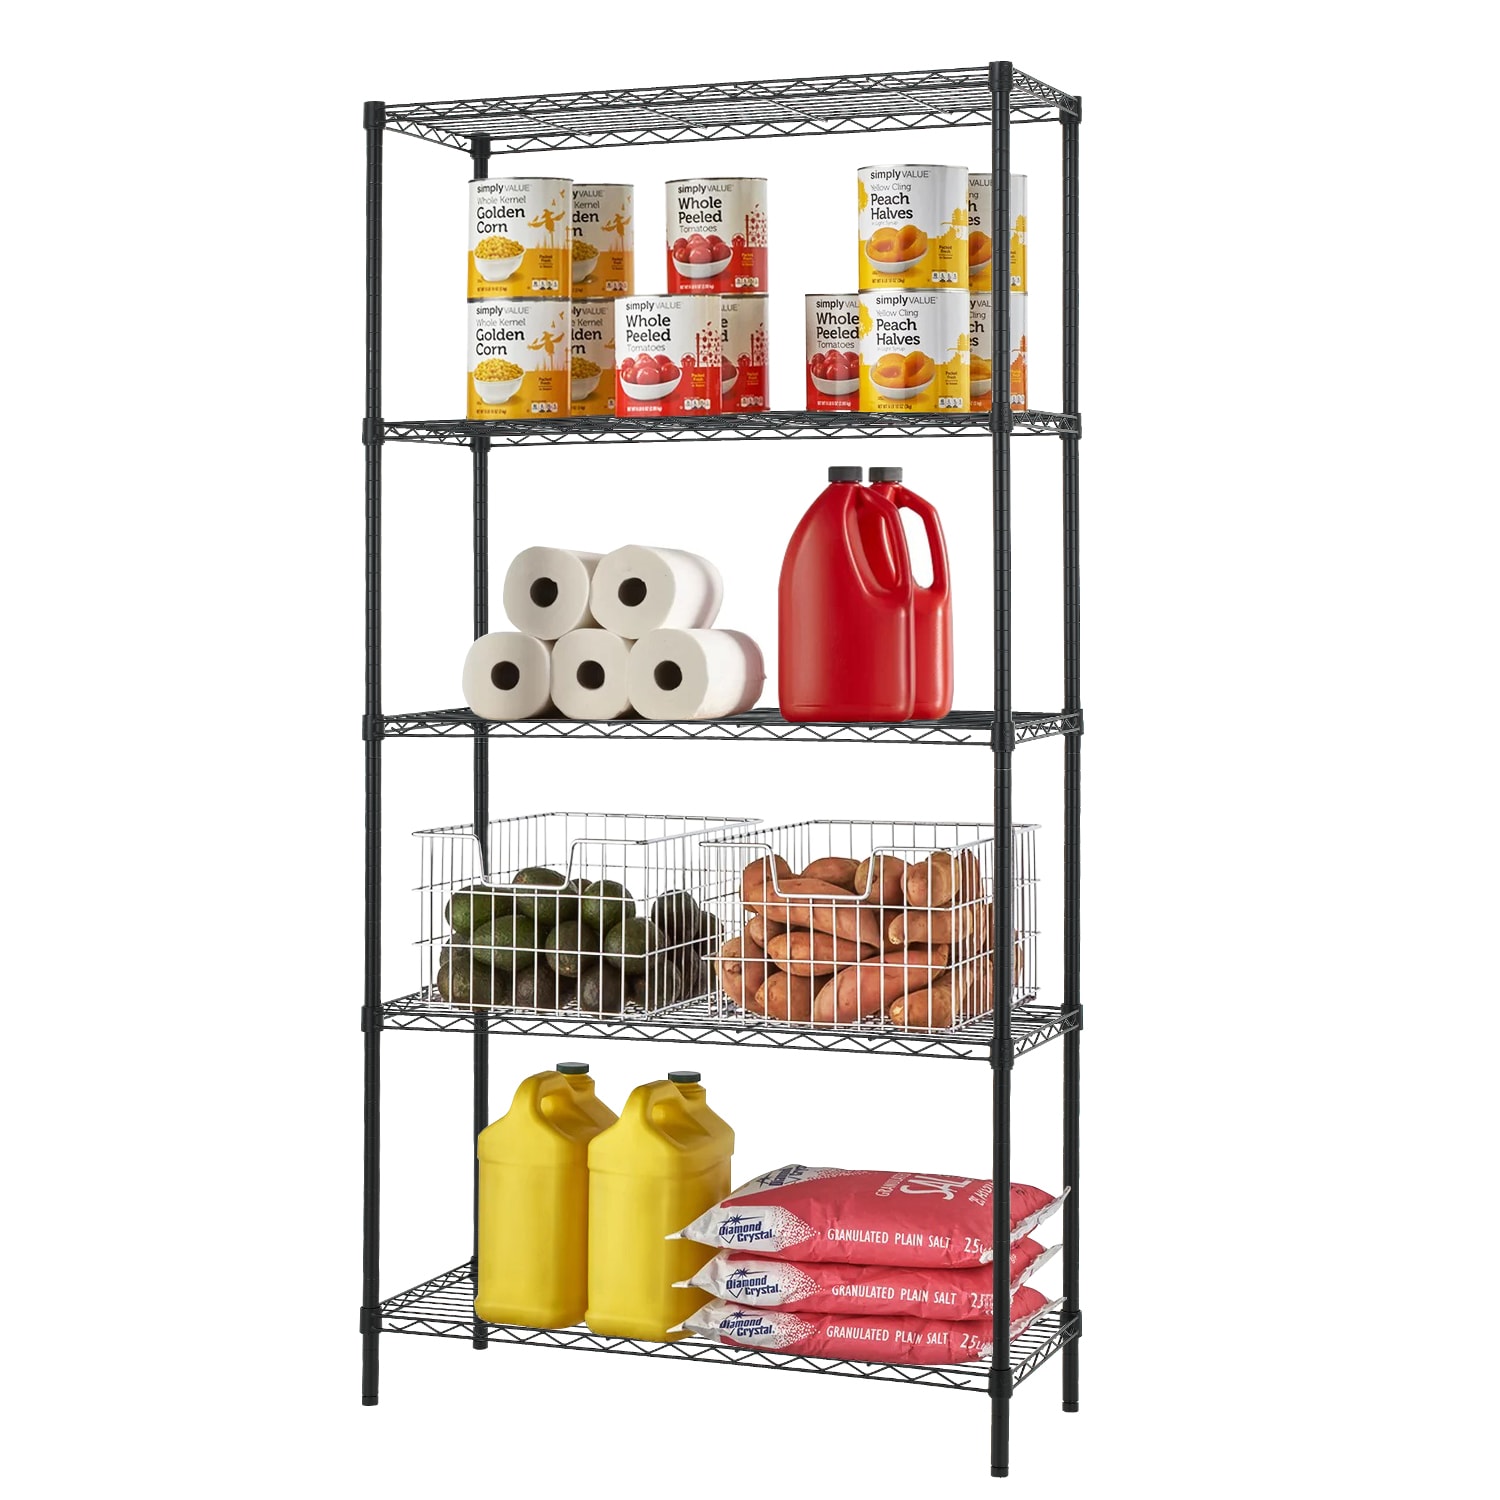  Ribbon Storage Organizers Rack Craft Ribbon Organizer Holder  Rack, 4 Tier Metal Wrapping Ribbon Display Stand with Removable Rod, Modern  Tabletop Storage Racks for Commercial (Color : Black, Size